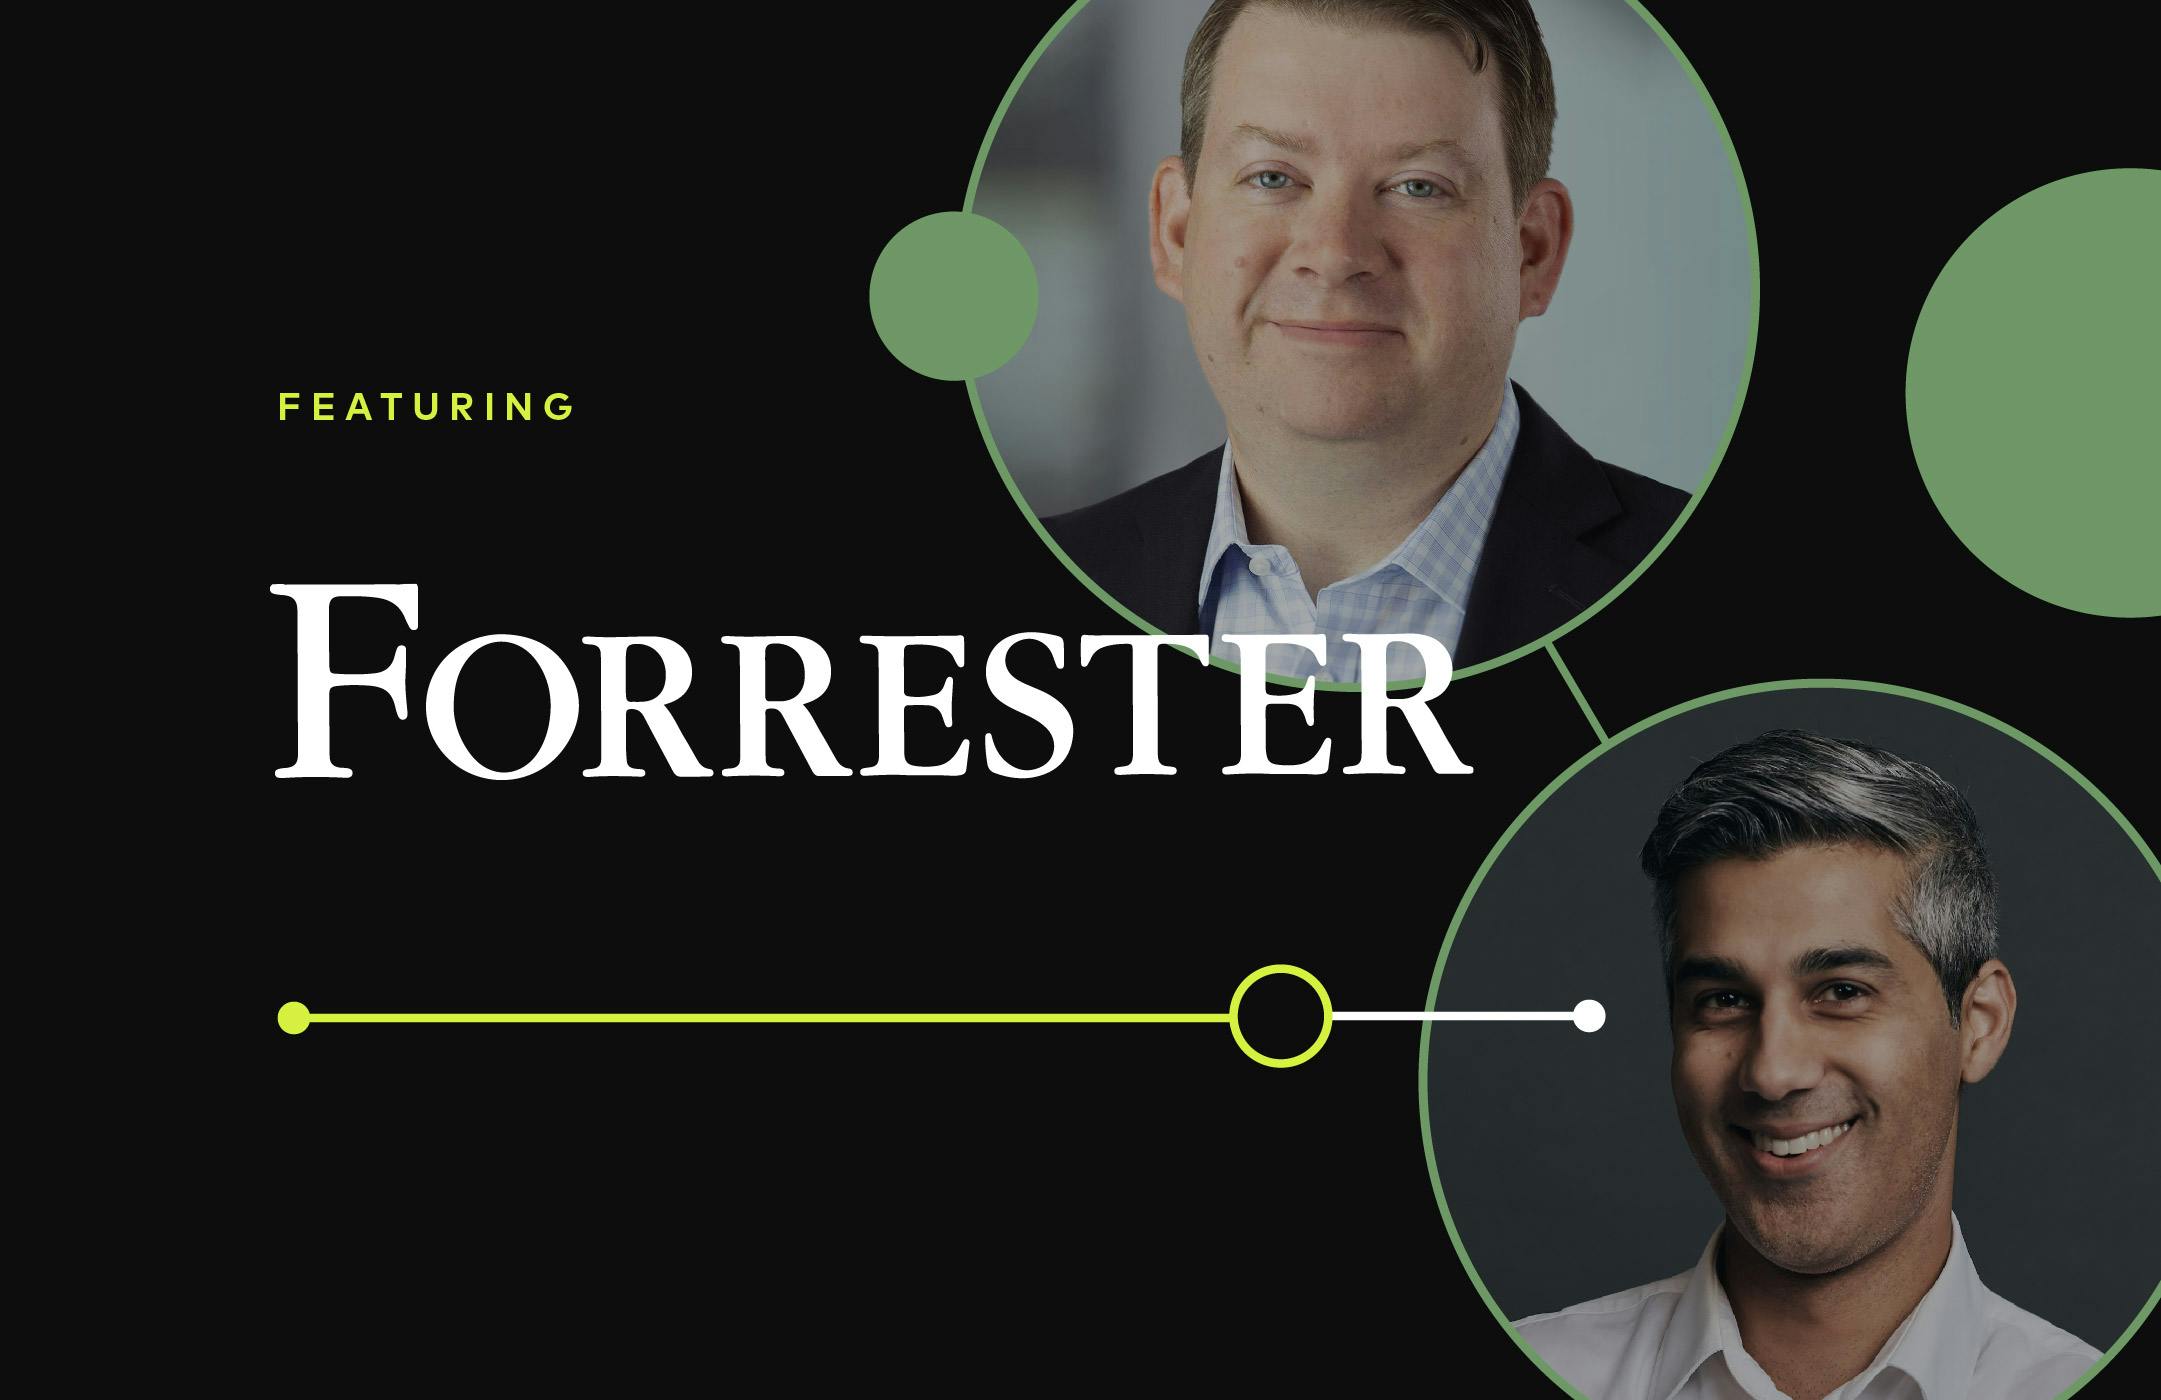 The State of the CDP Webinar, featuring Forrester